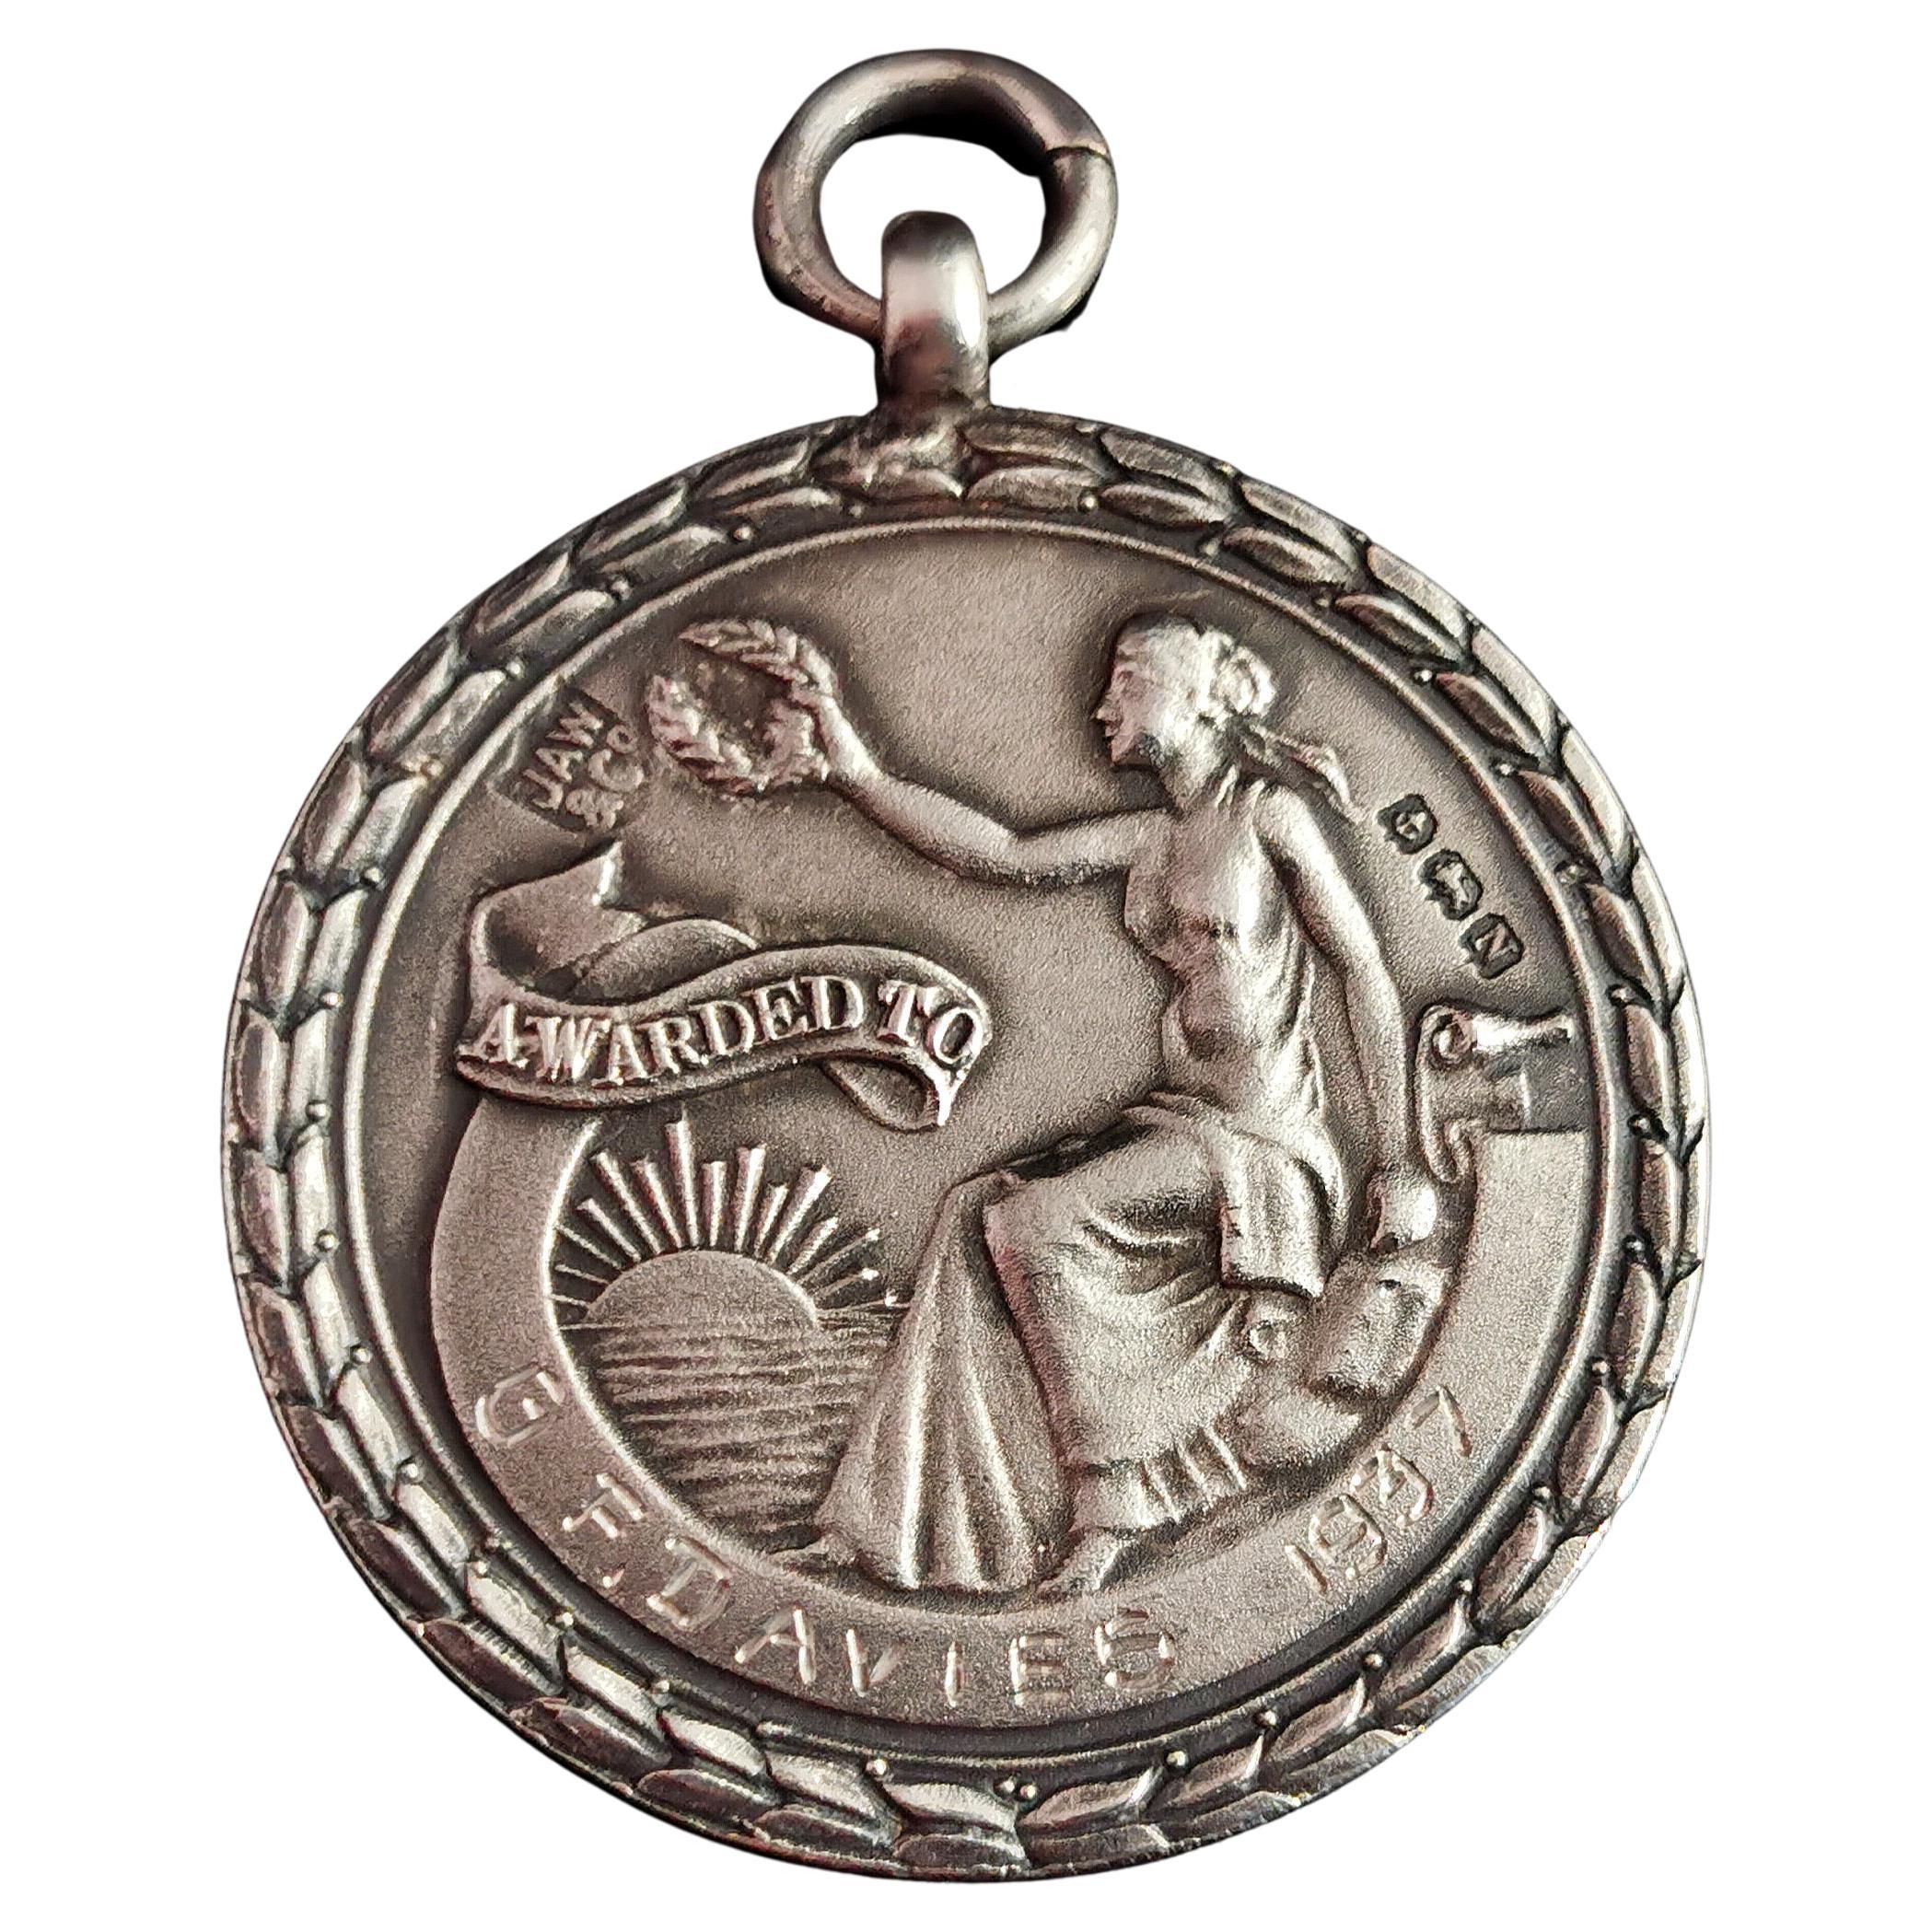 Vintage Sterling Silver Watch Fob Pendant, Lifesaving, 1930s